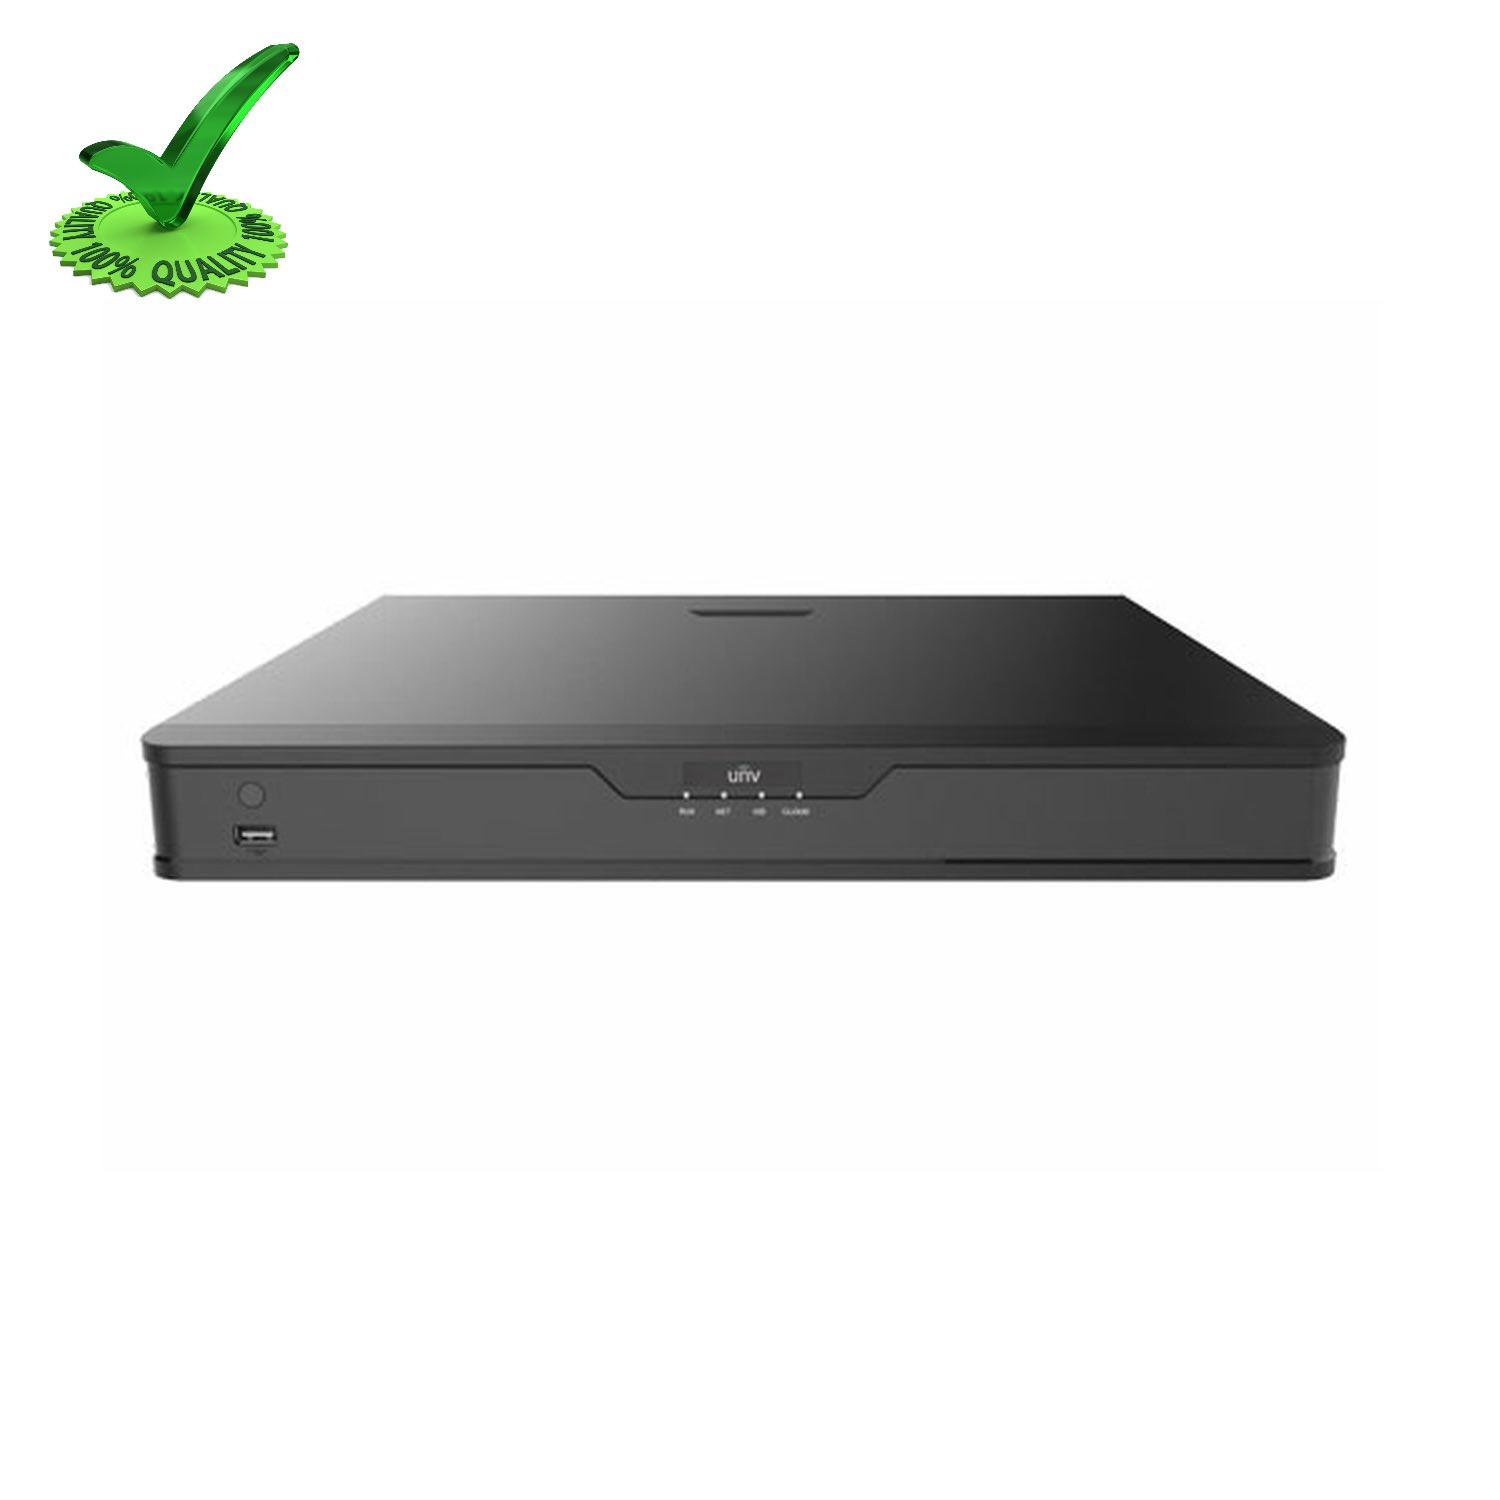 Uniview NVR302-08S2-P8 8Ch HD Network Video Recorder